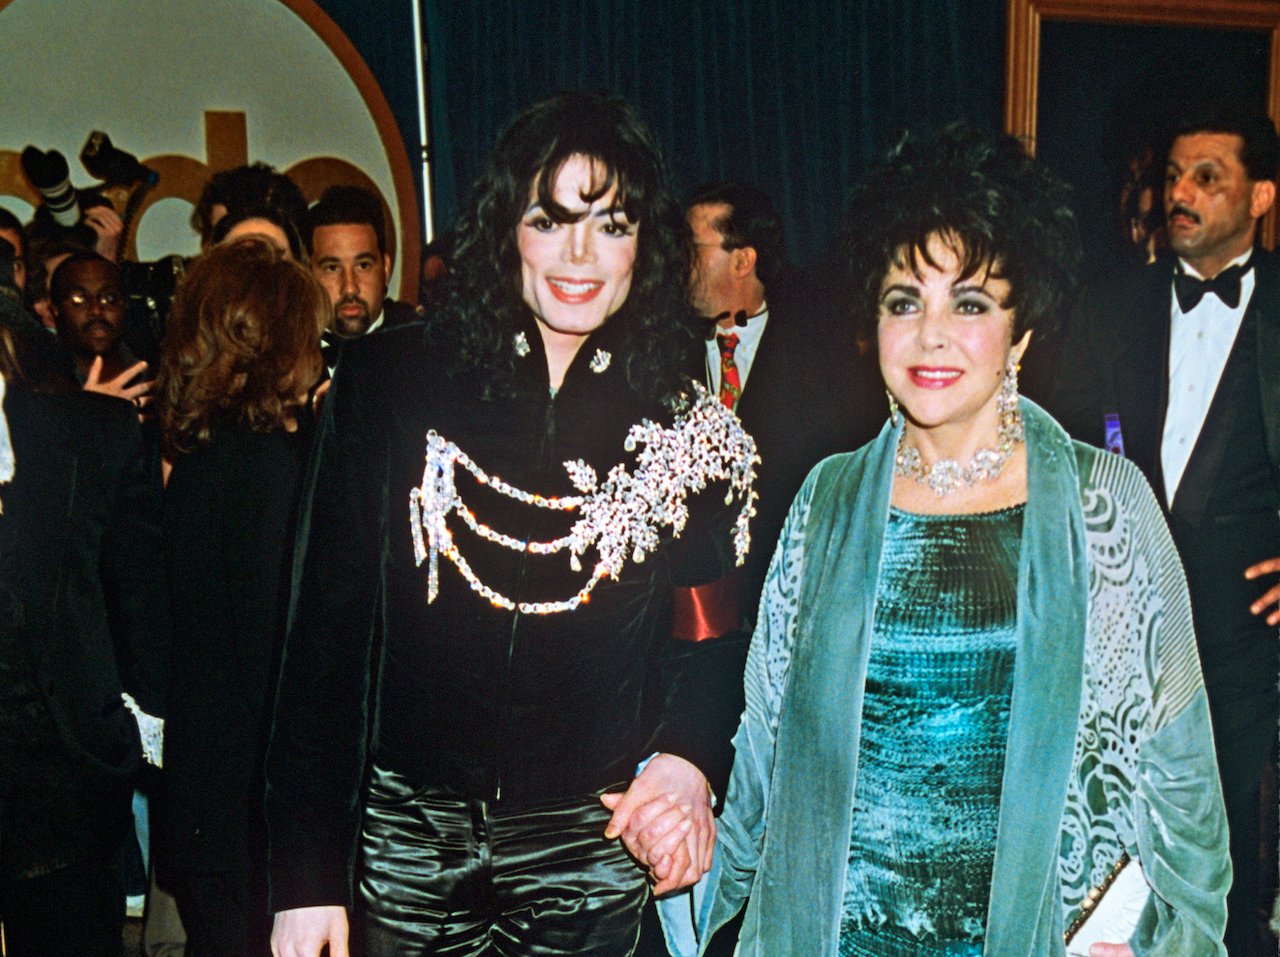 Michael Jackson in a black top with diamond adornments, standing next to Elizabeth Taylor in teal and diamonds